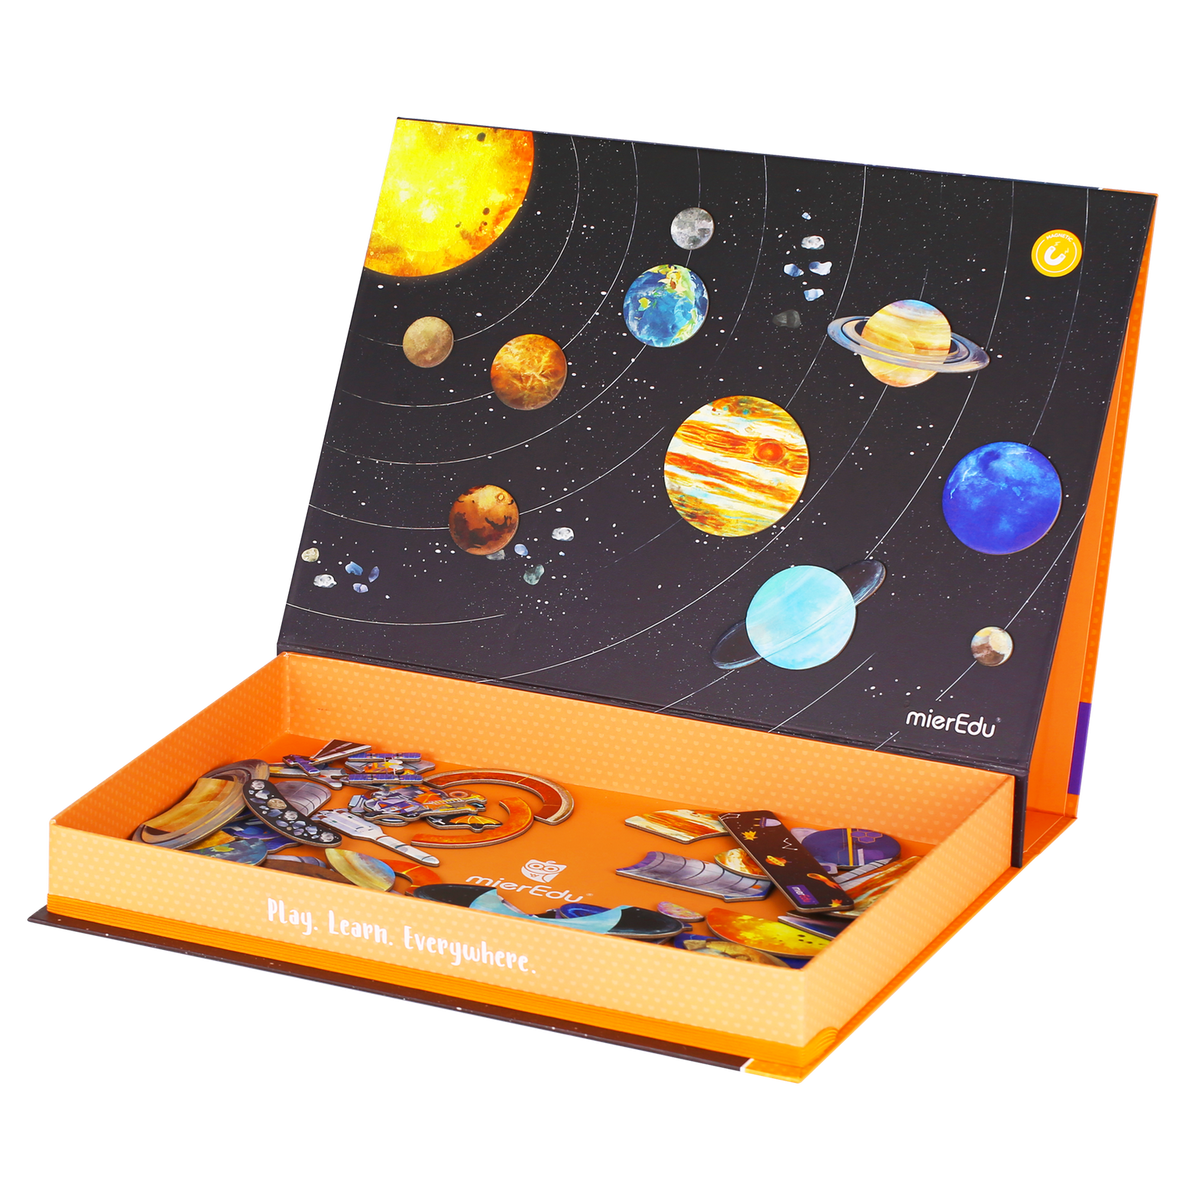 mierEdu magnetic art case - All about space